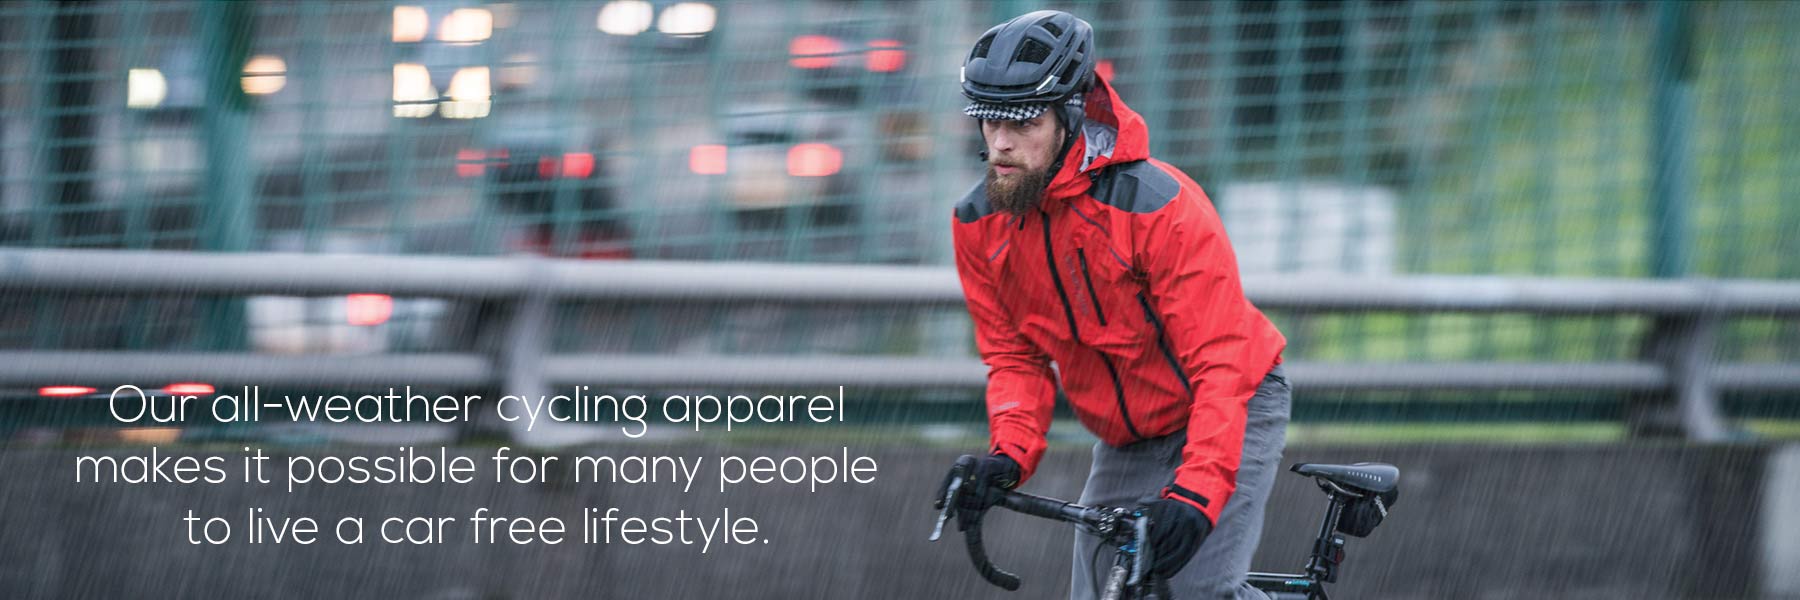 It's possible to live car-free with the right gear